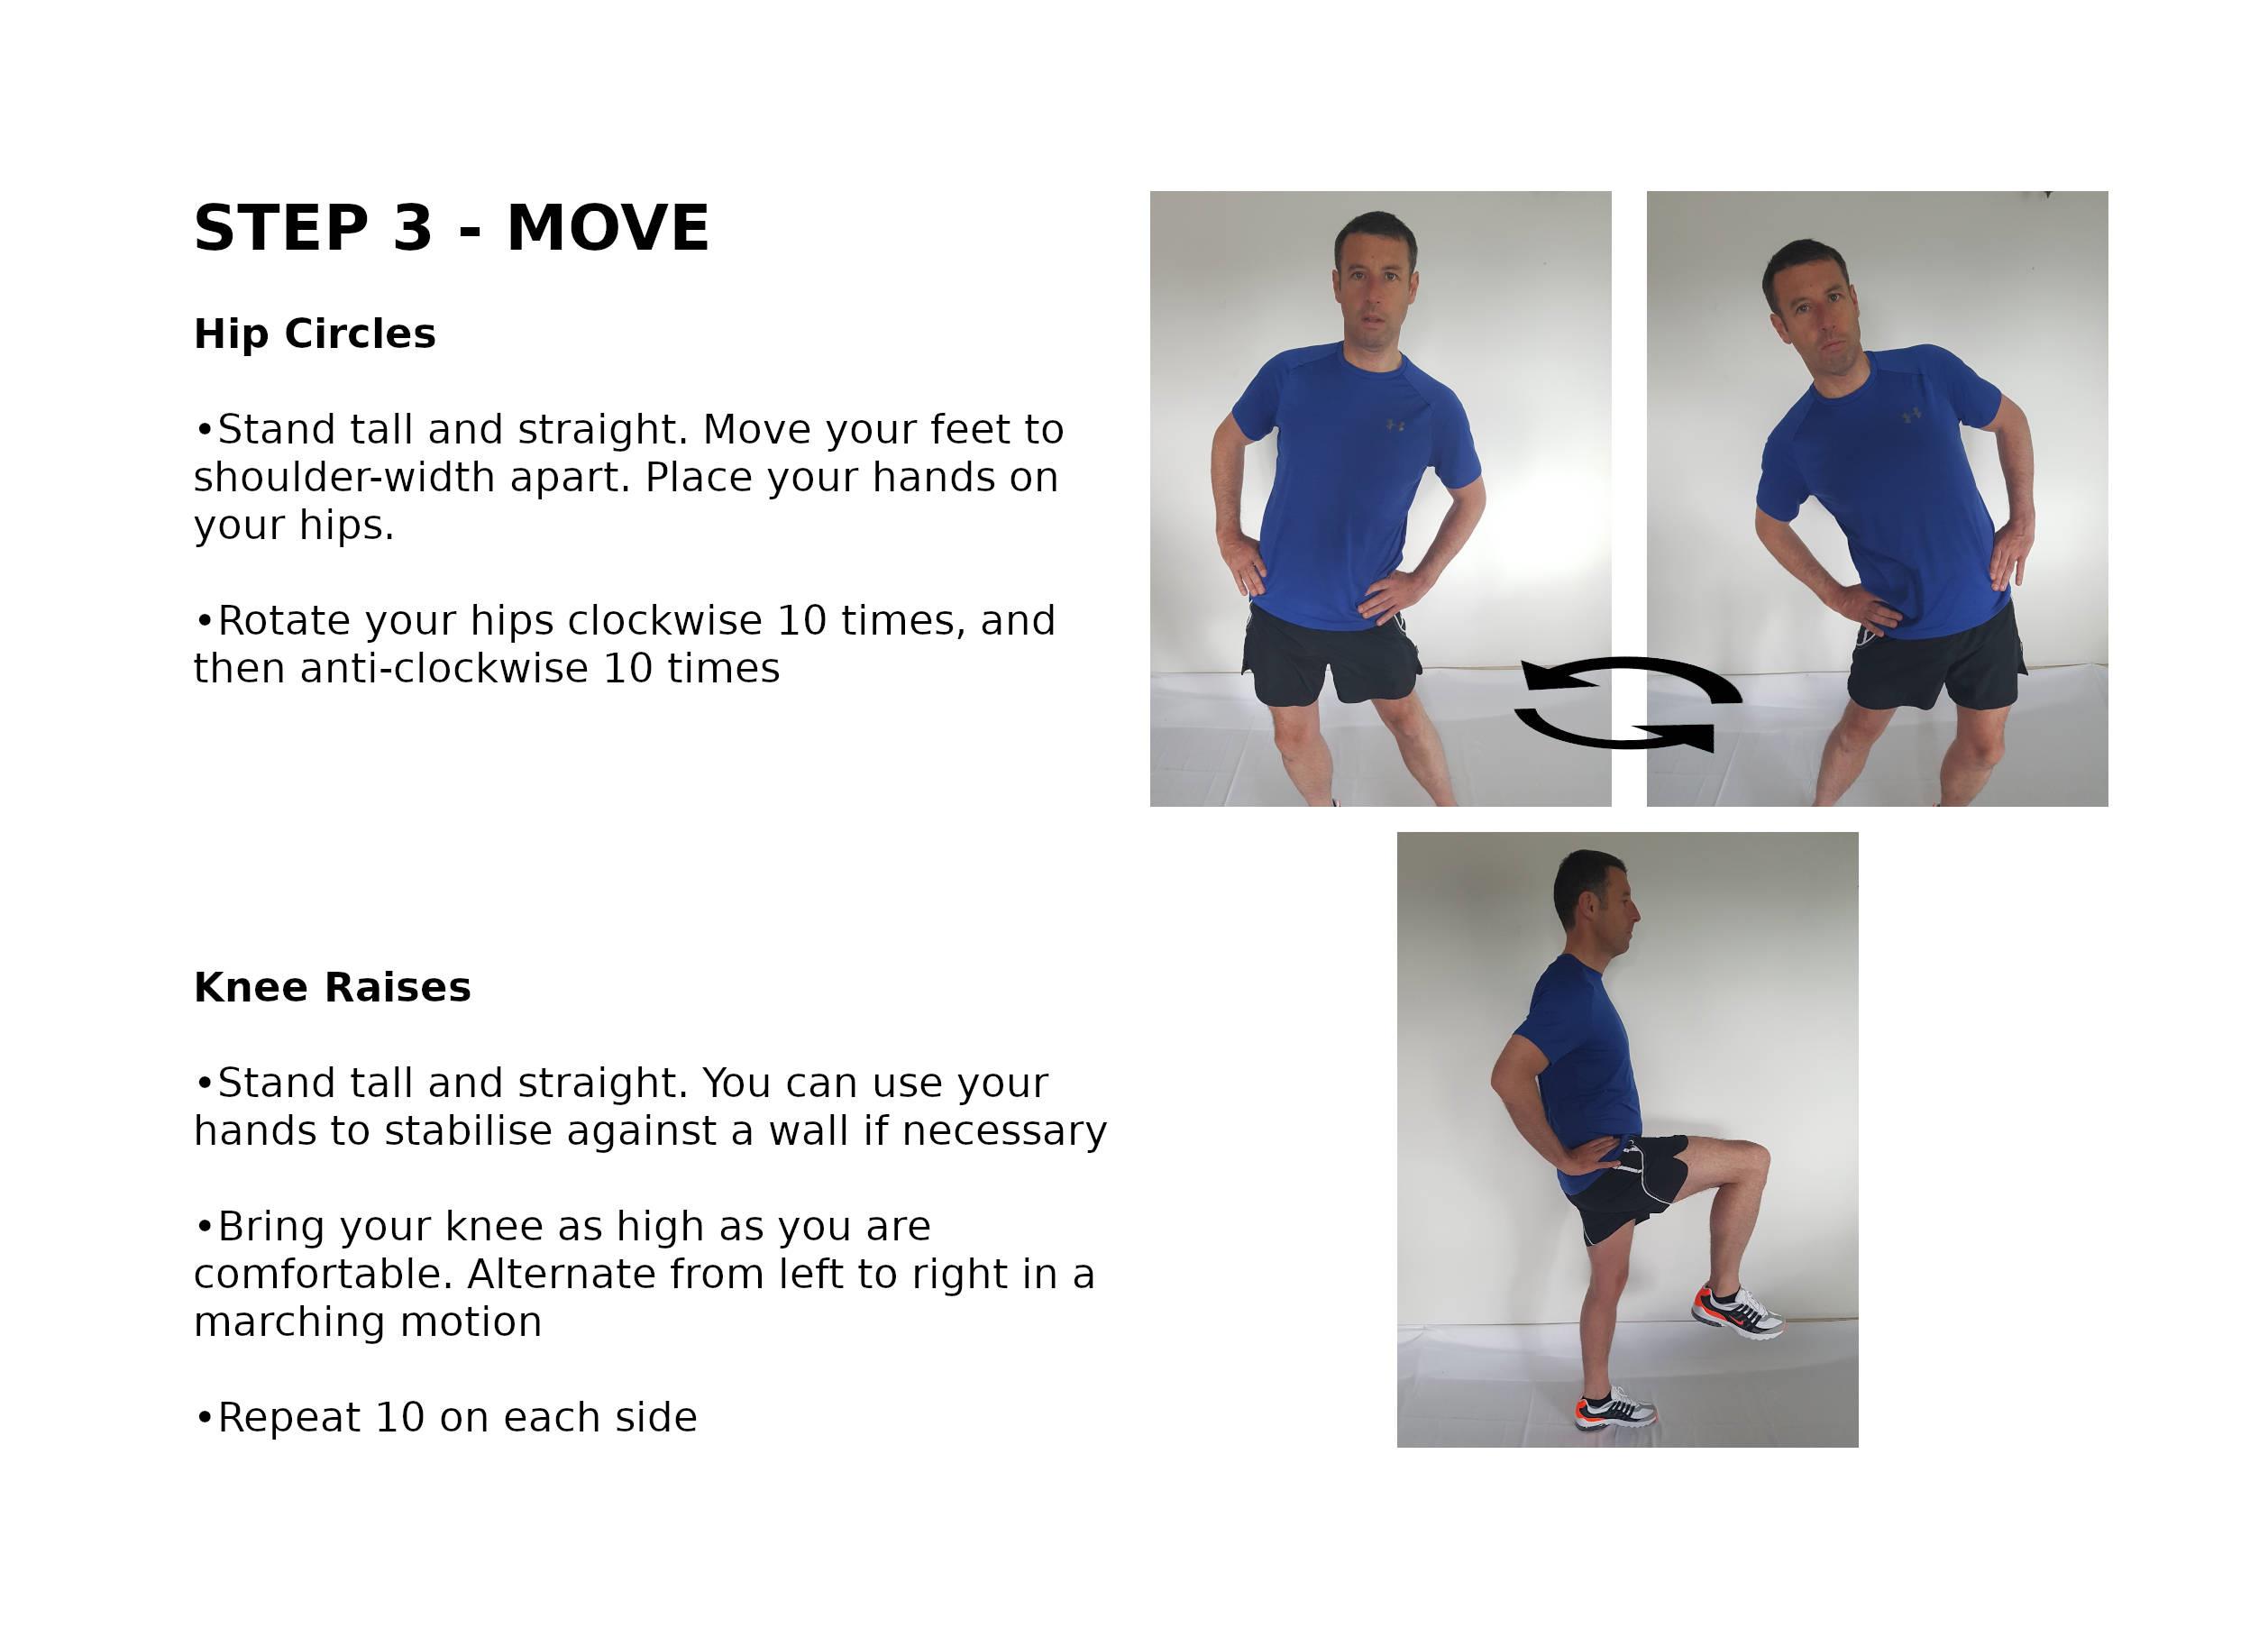 Hip Movement Exercises To Help Pain